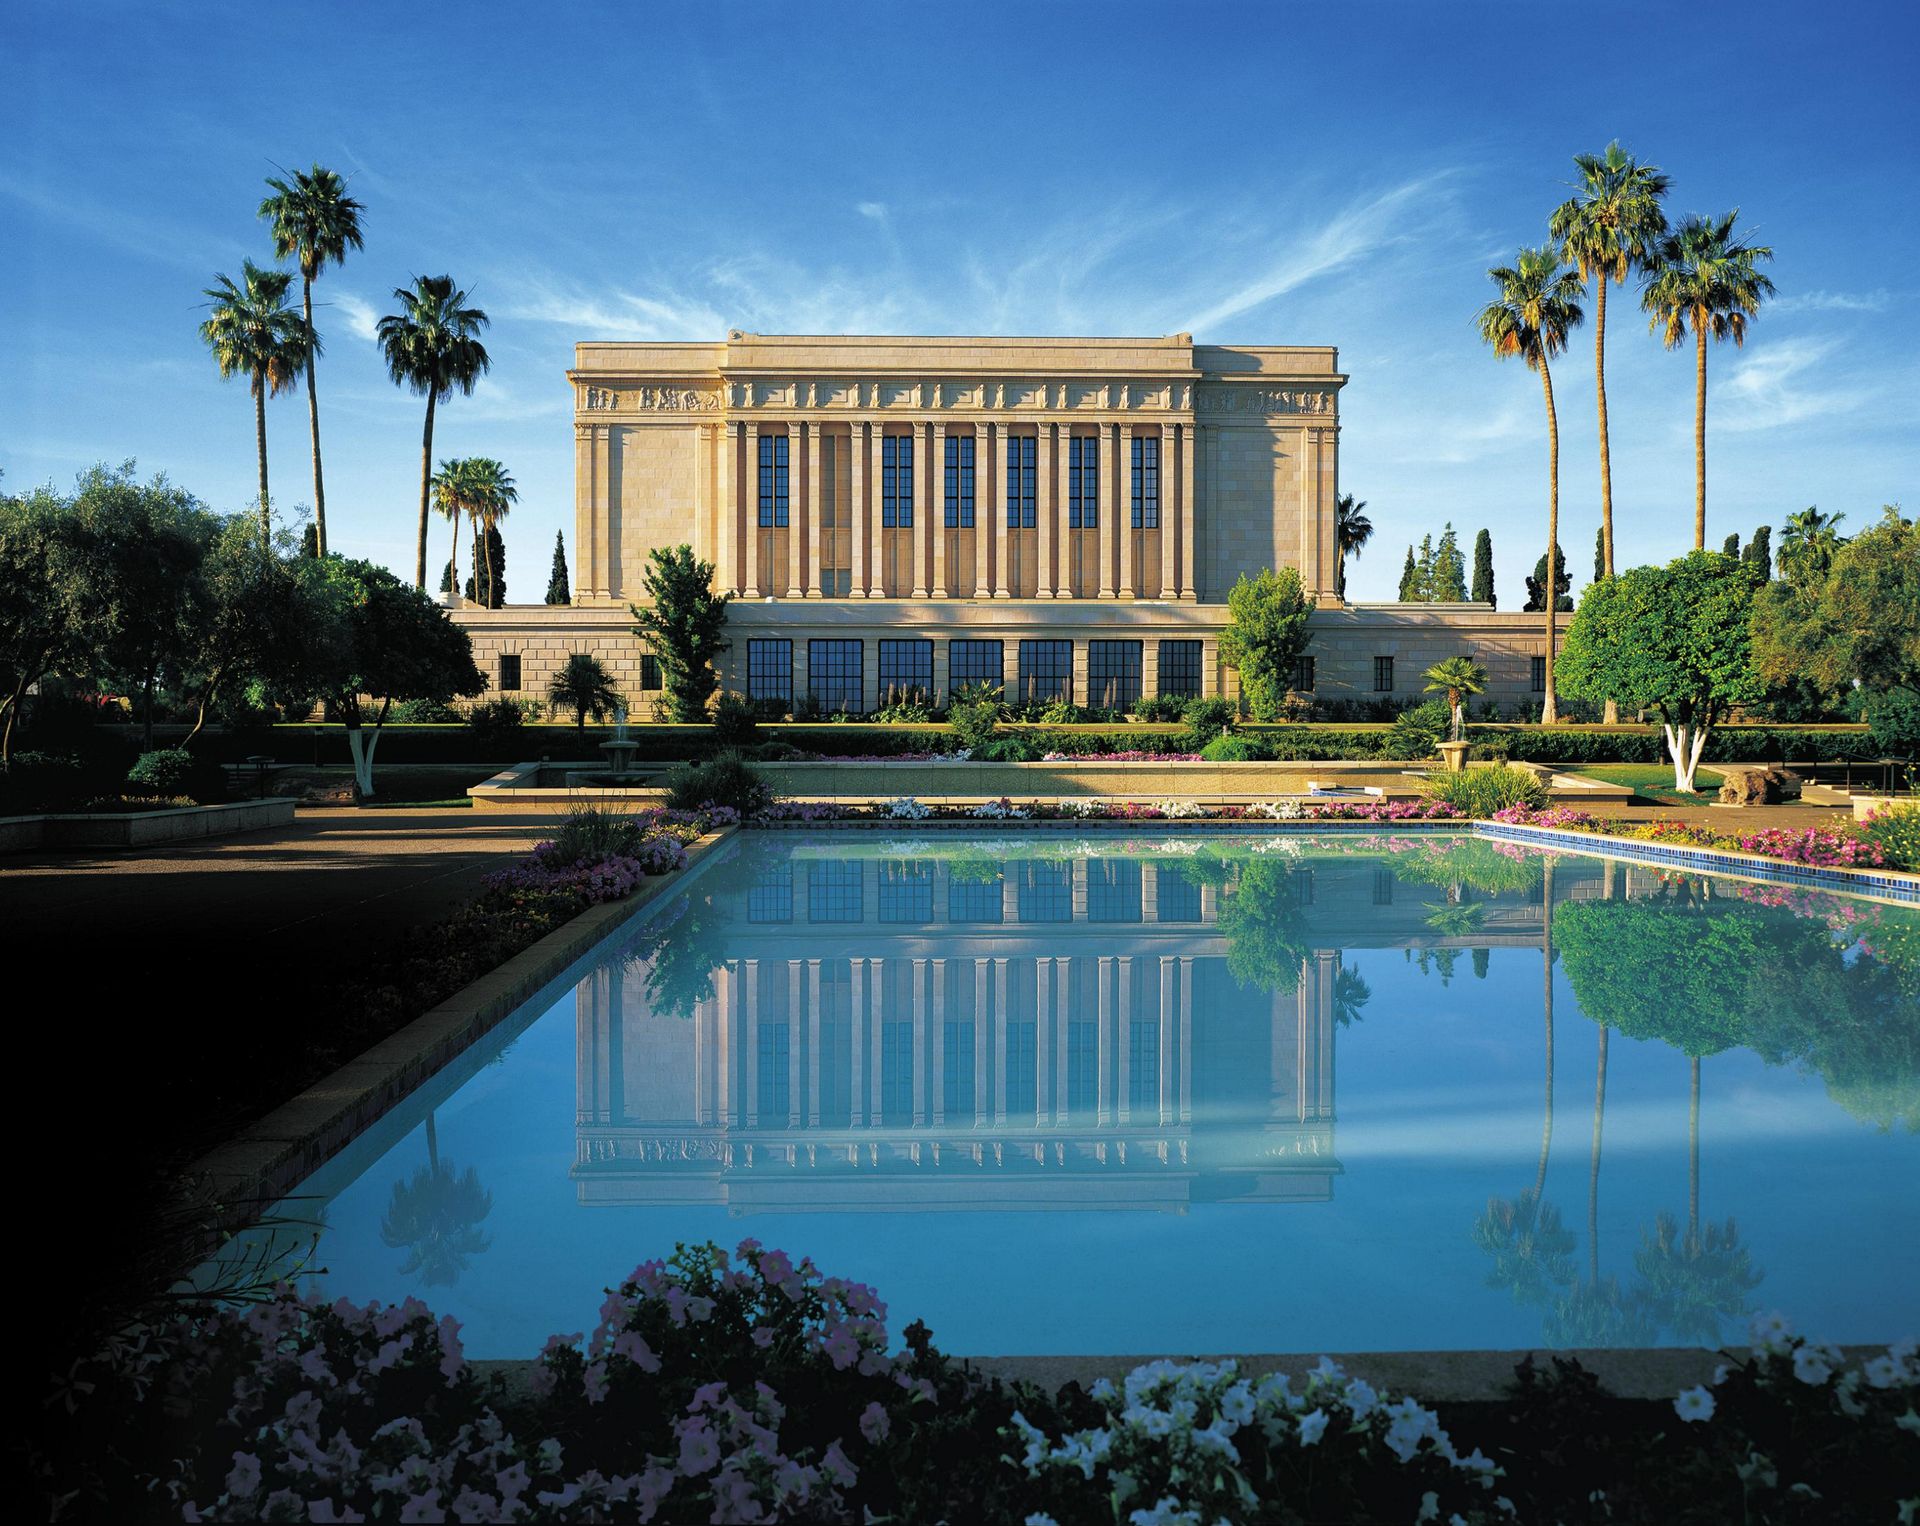 The Mesa Arizona Temple and its reflecting pool on a sunny day.